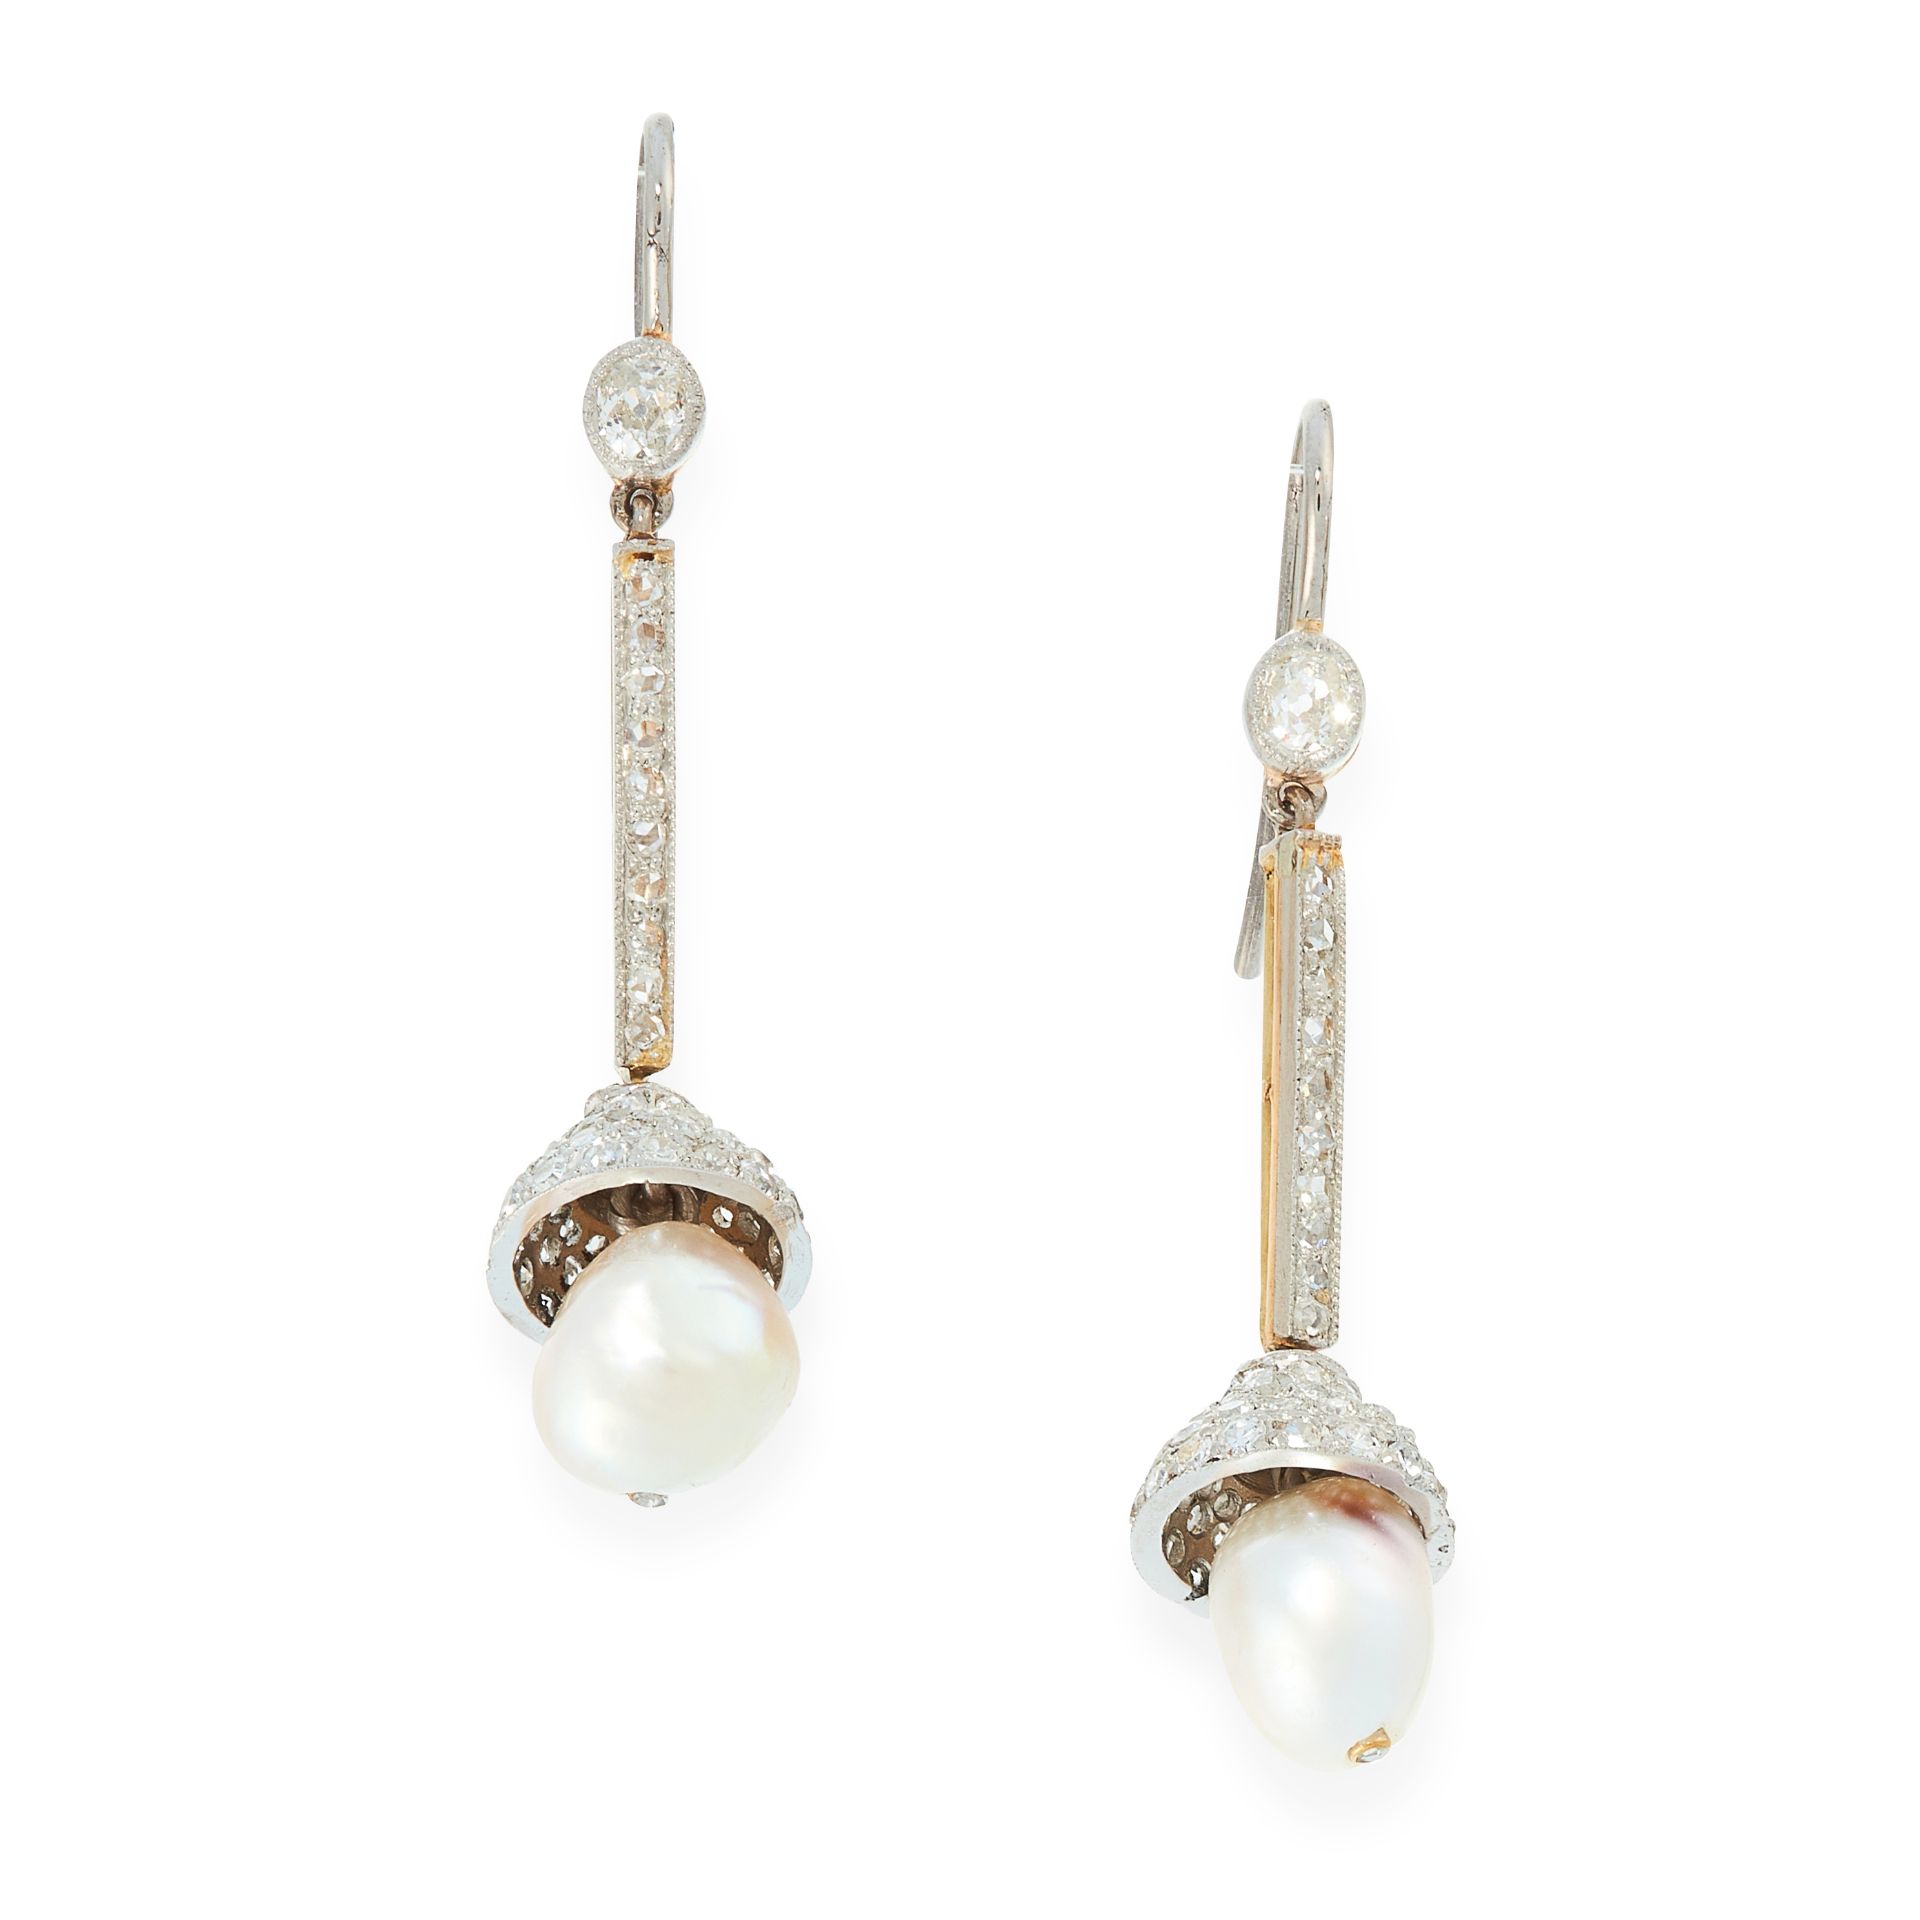 A PAIR OF NATURAL PEARL AND DIAMOND EARRINGS in platinum, each set with a natural pearl of 8.1mm and